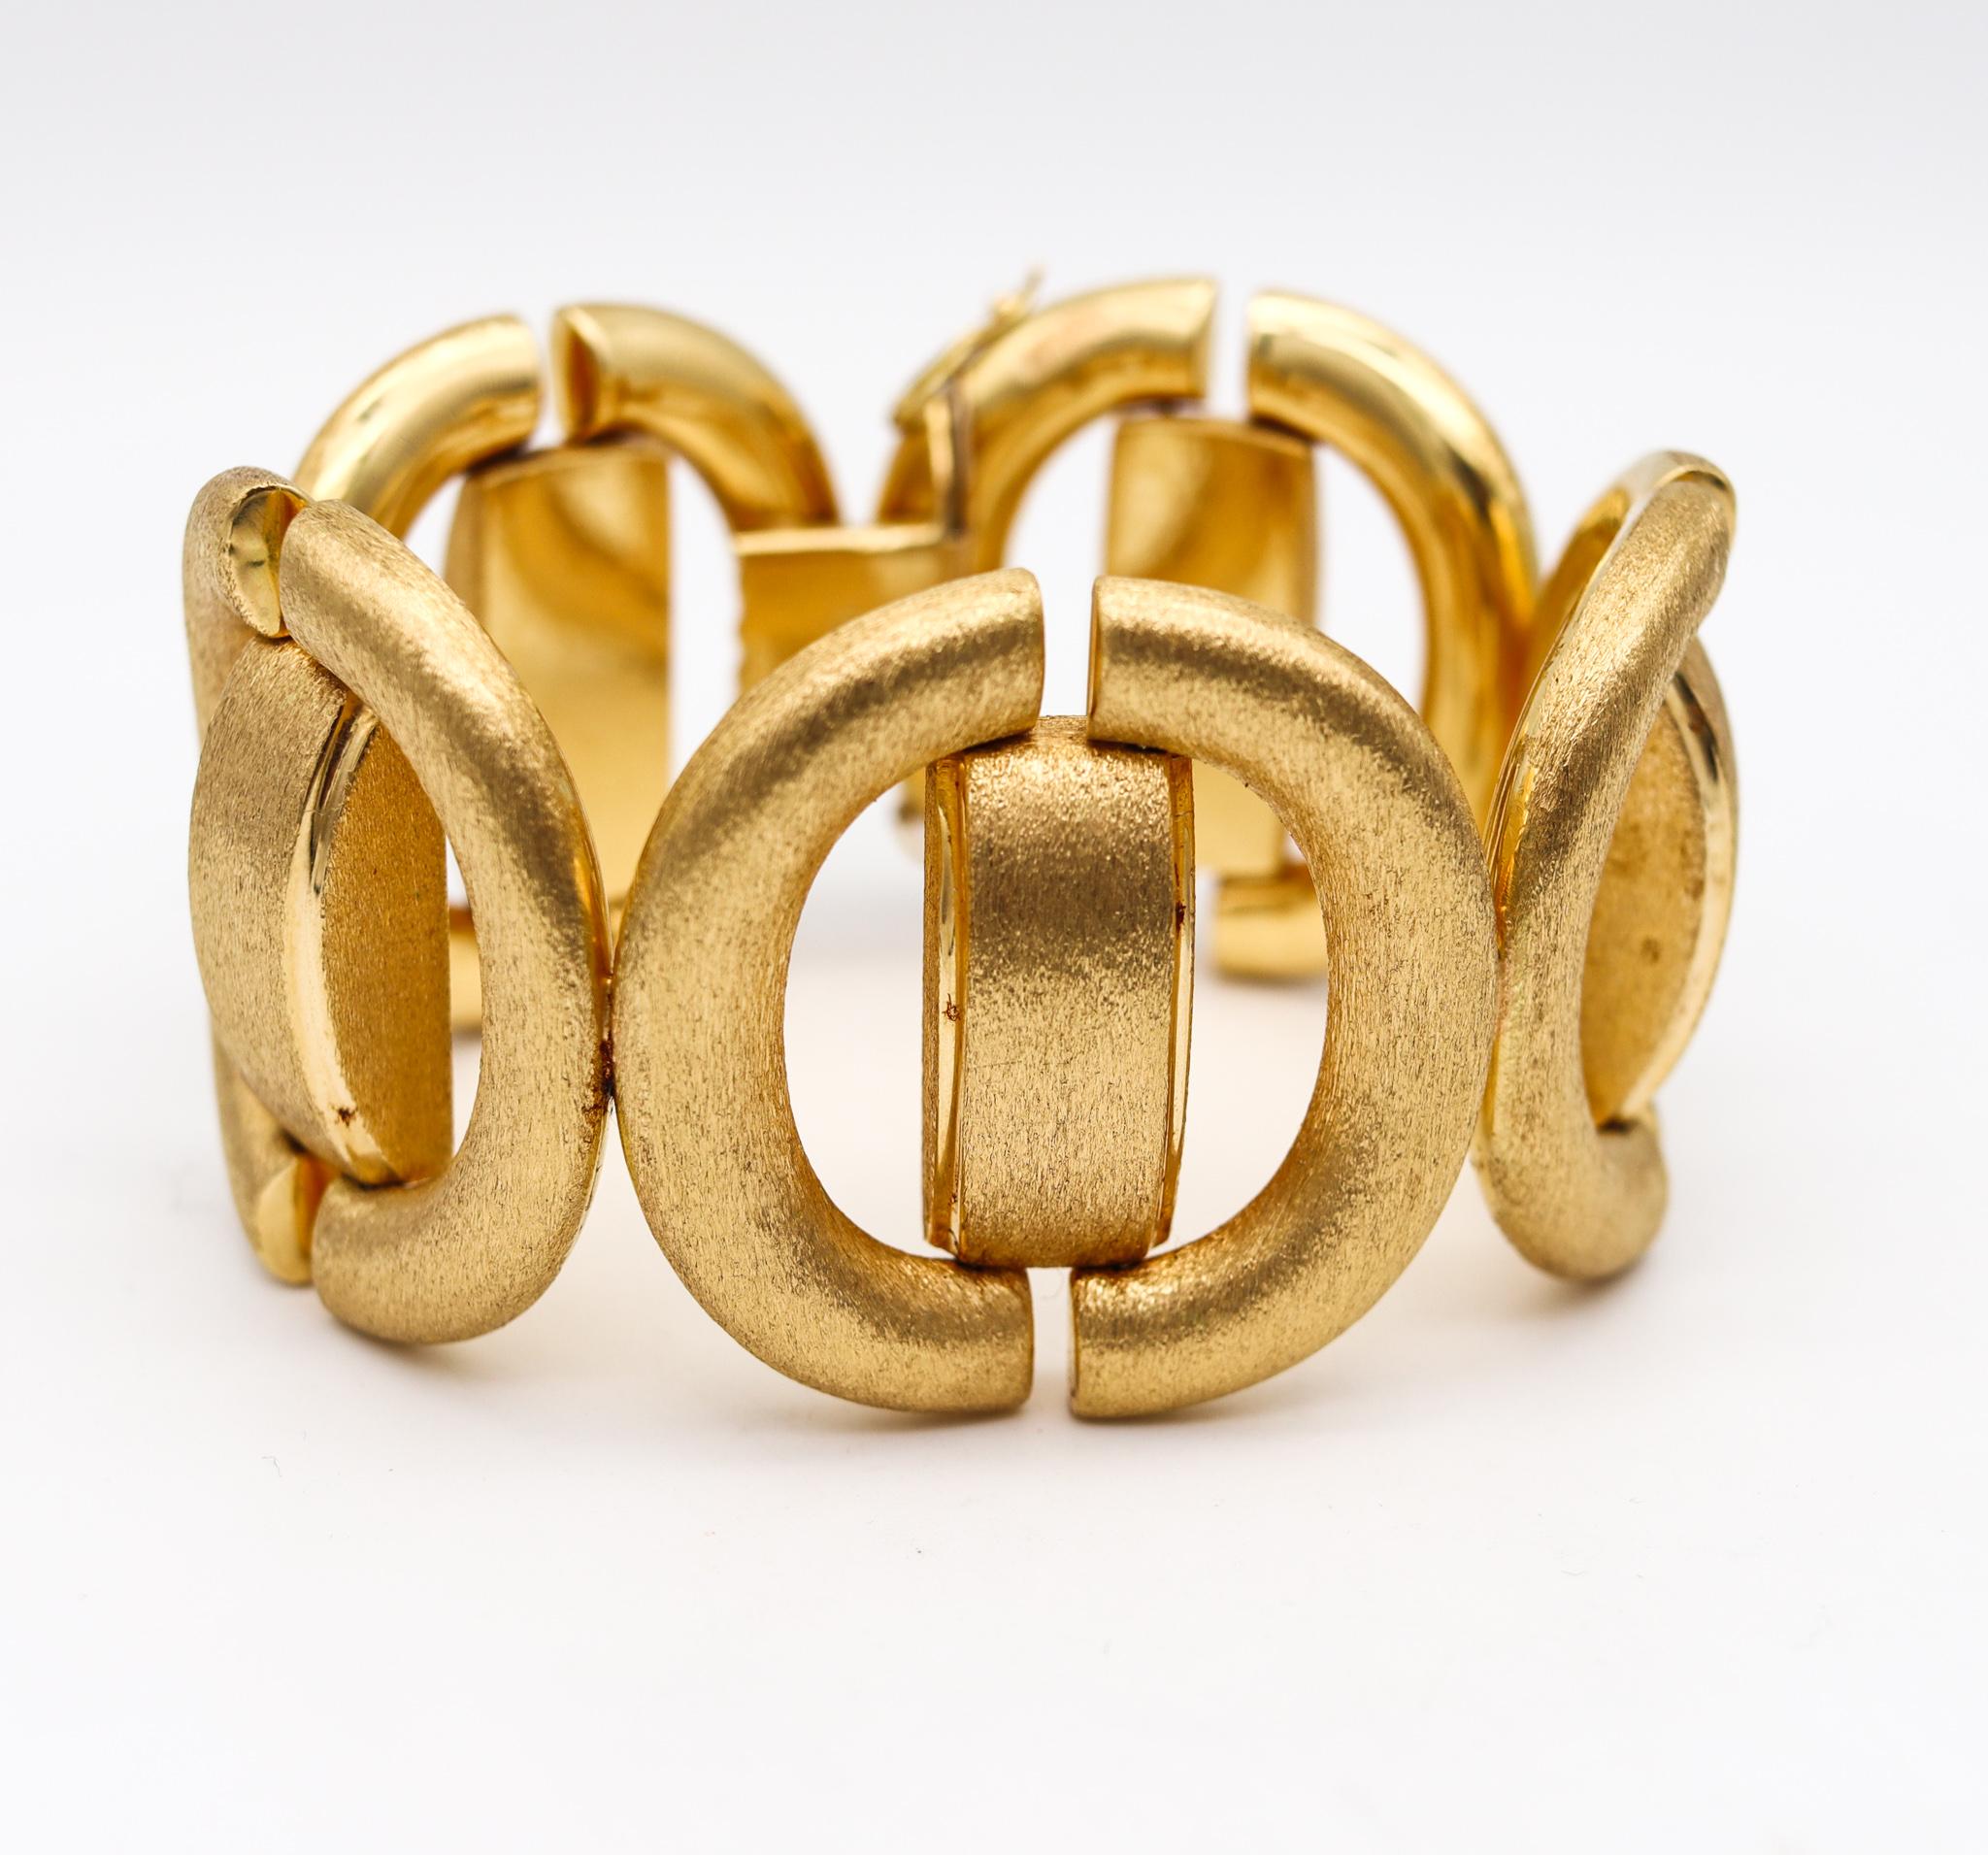 Modernist 1970 Geometric Bold Textured Bracelet In Brushed 18Kt Yellow Gold In Excellent Condition For Sale In Miami, FL